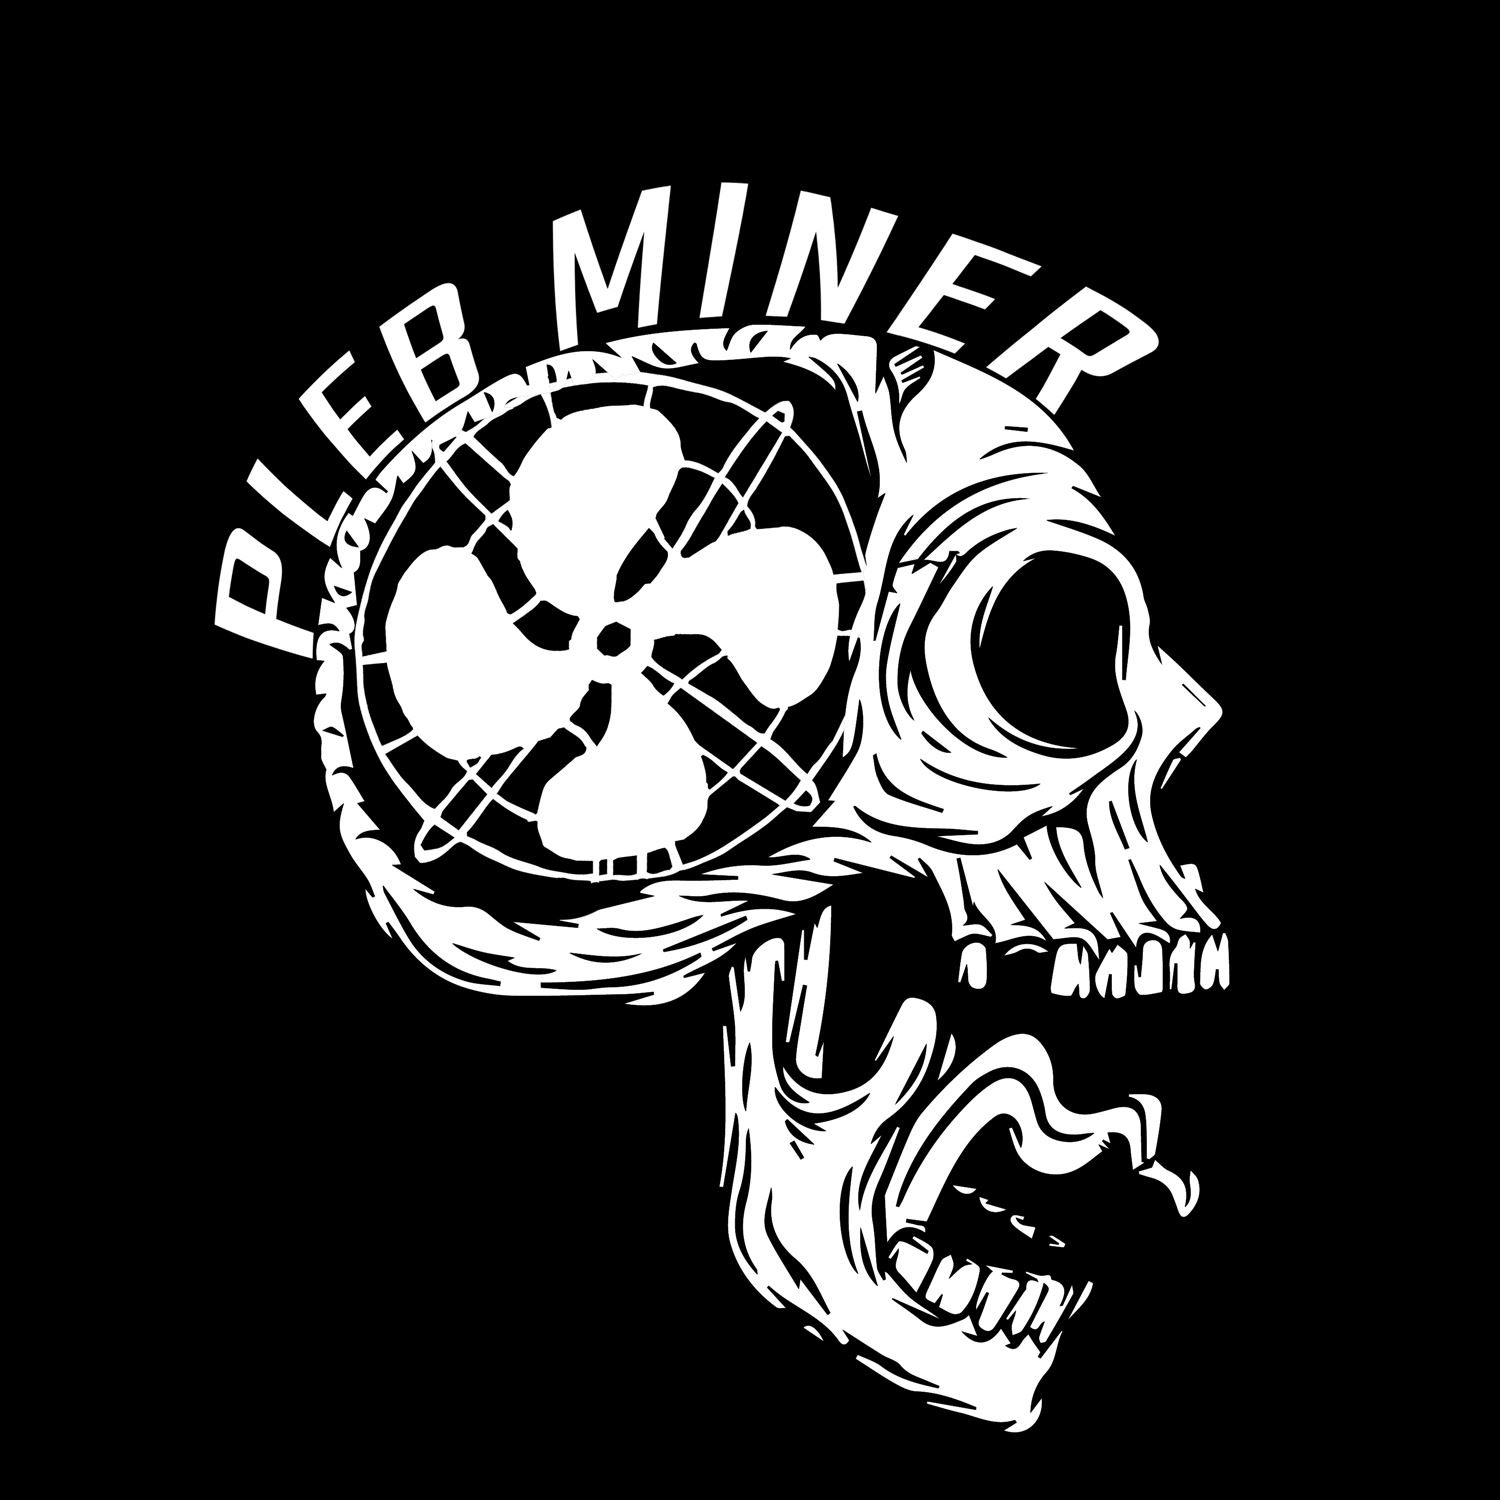 Pleb Miner Monthly EP06 (Miners defend the Bitcoin Network)